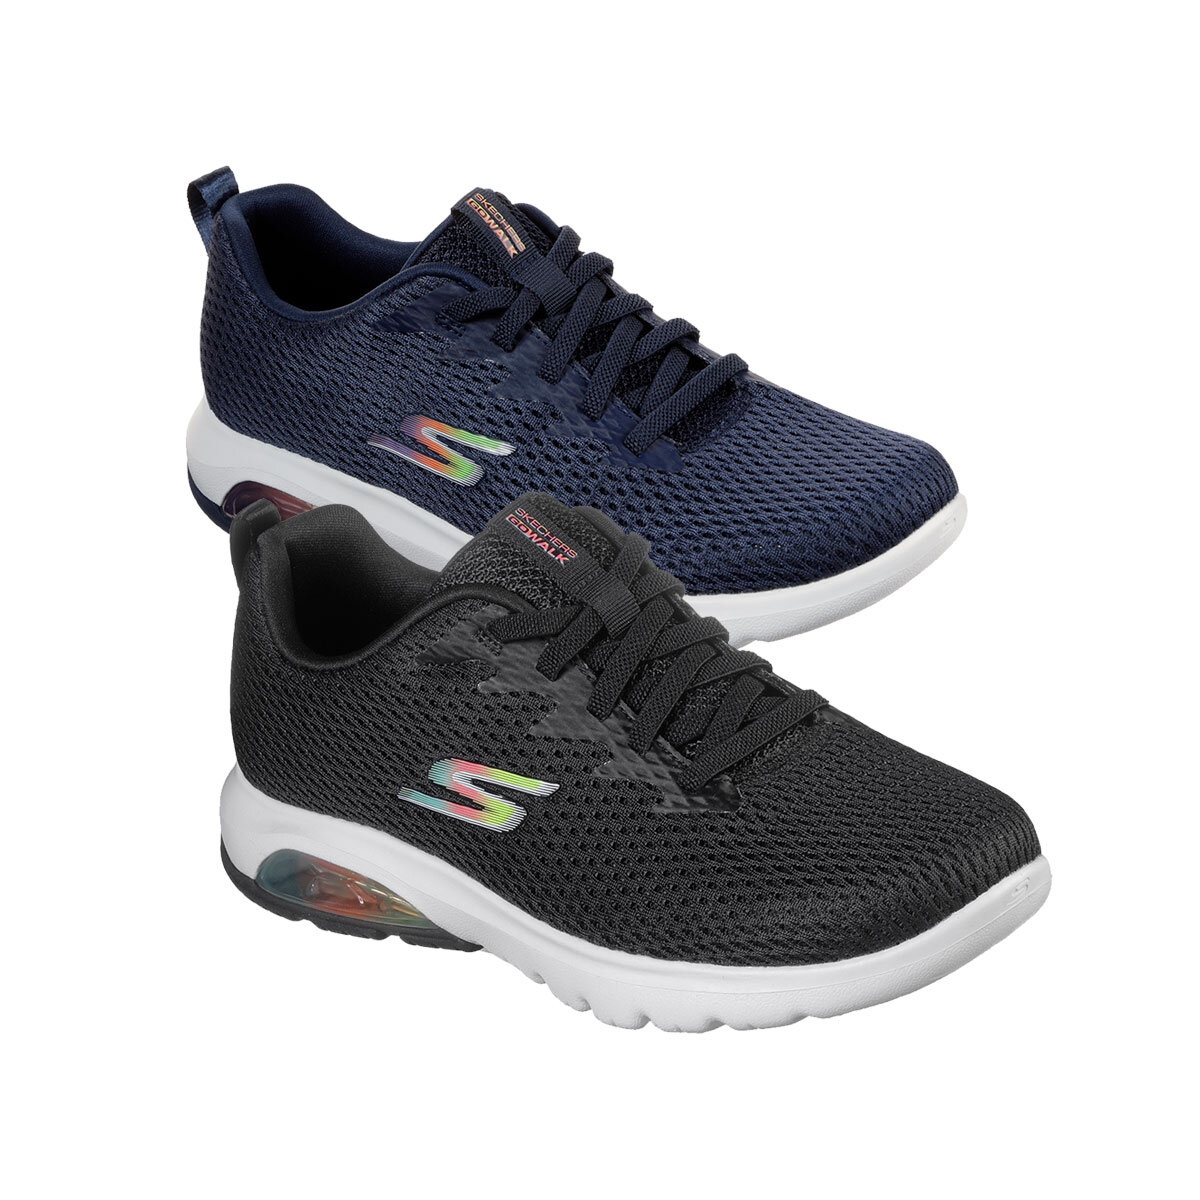 Skechers Walk Air Whirl Shoes in 2 and...